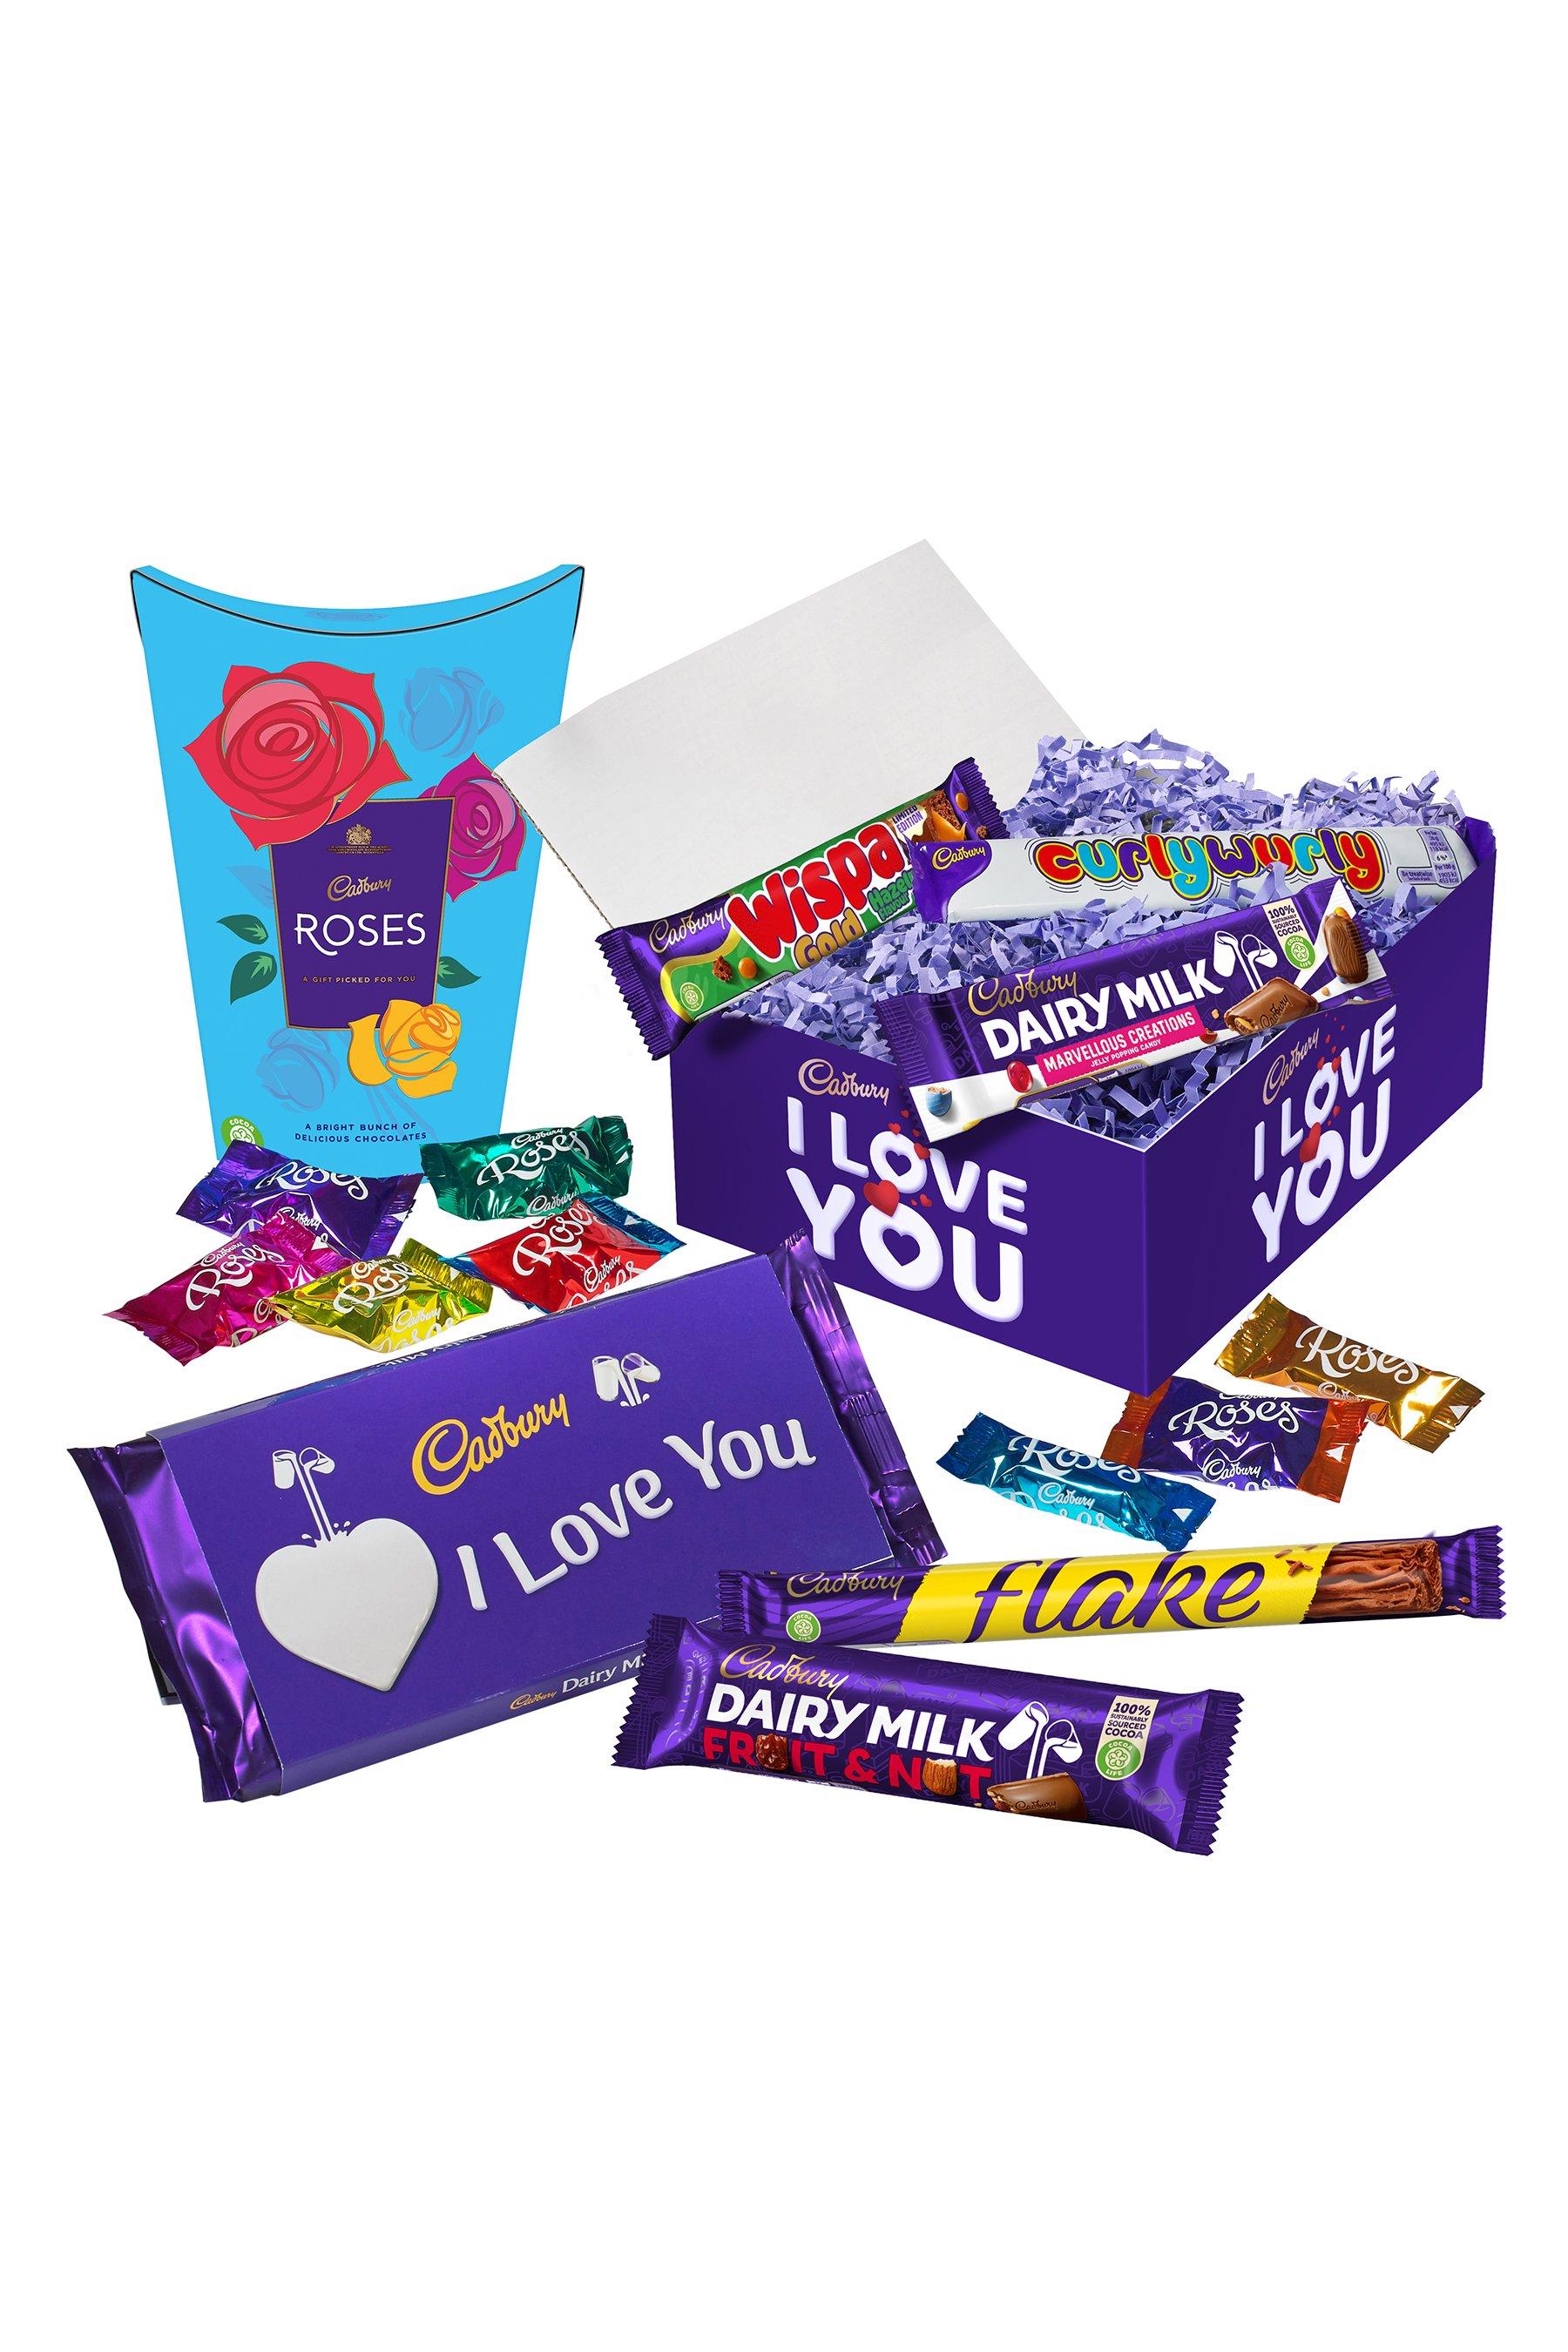 Image for Cadbury I Love You Gift from studio